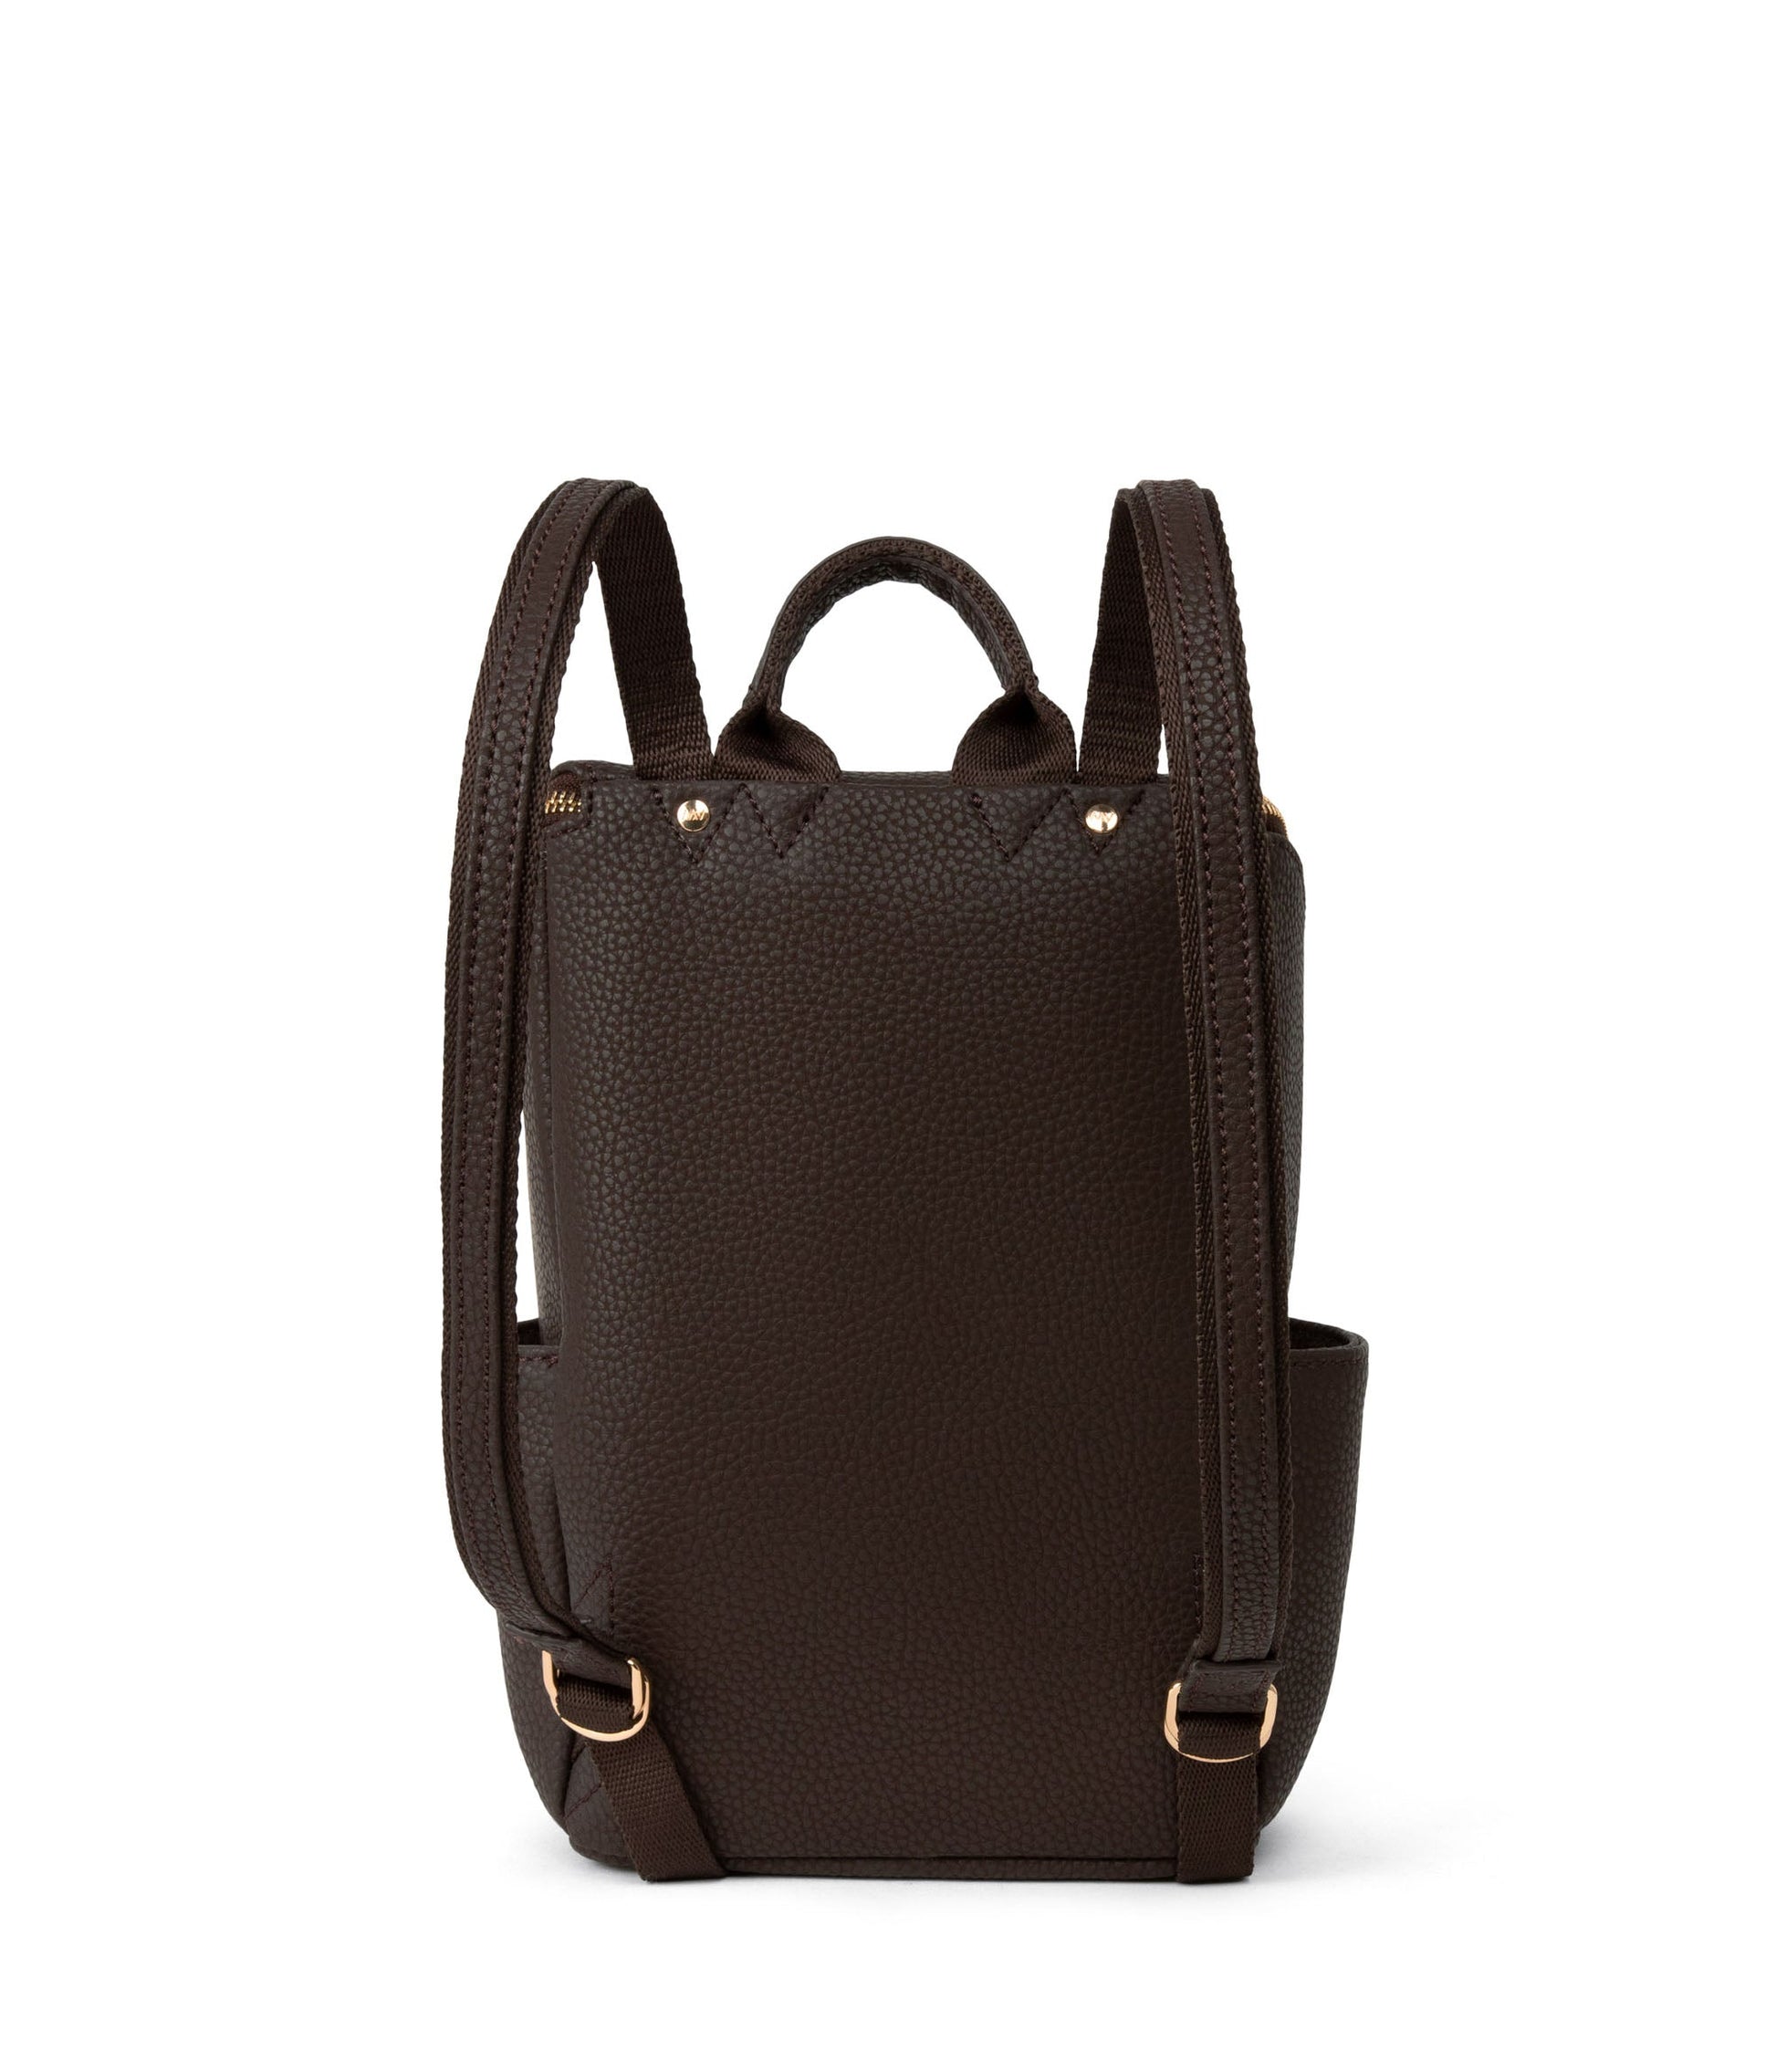 BRAVESM Small Vegan Backpack - Purity | Color: Brown - variant::truffle